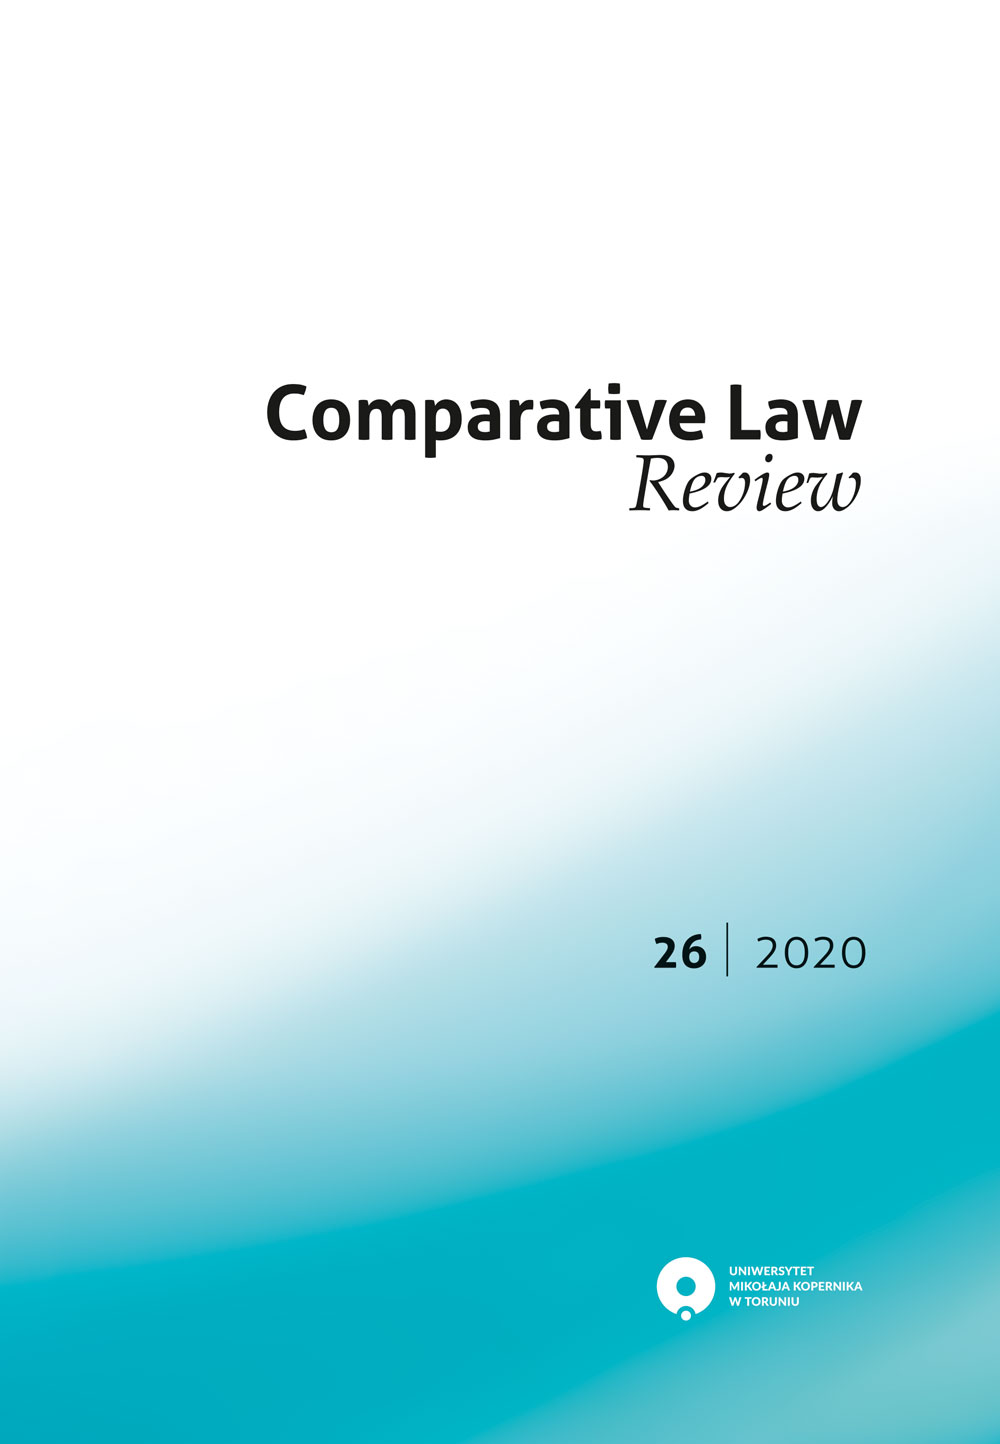 Property Rights and Legitimate Expectations Under United States Constitutional Law and the European Convention on Human Rights: Some Comparative Remarks